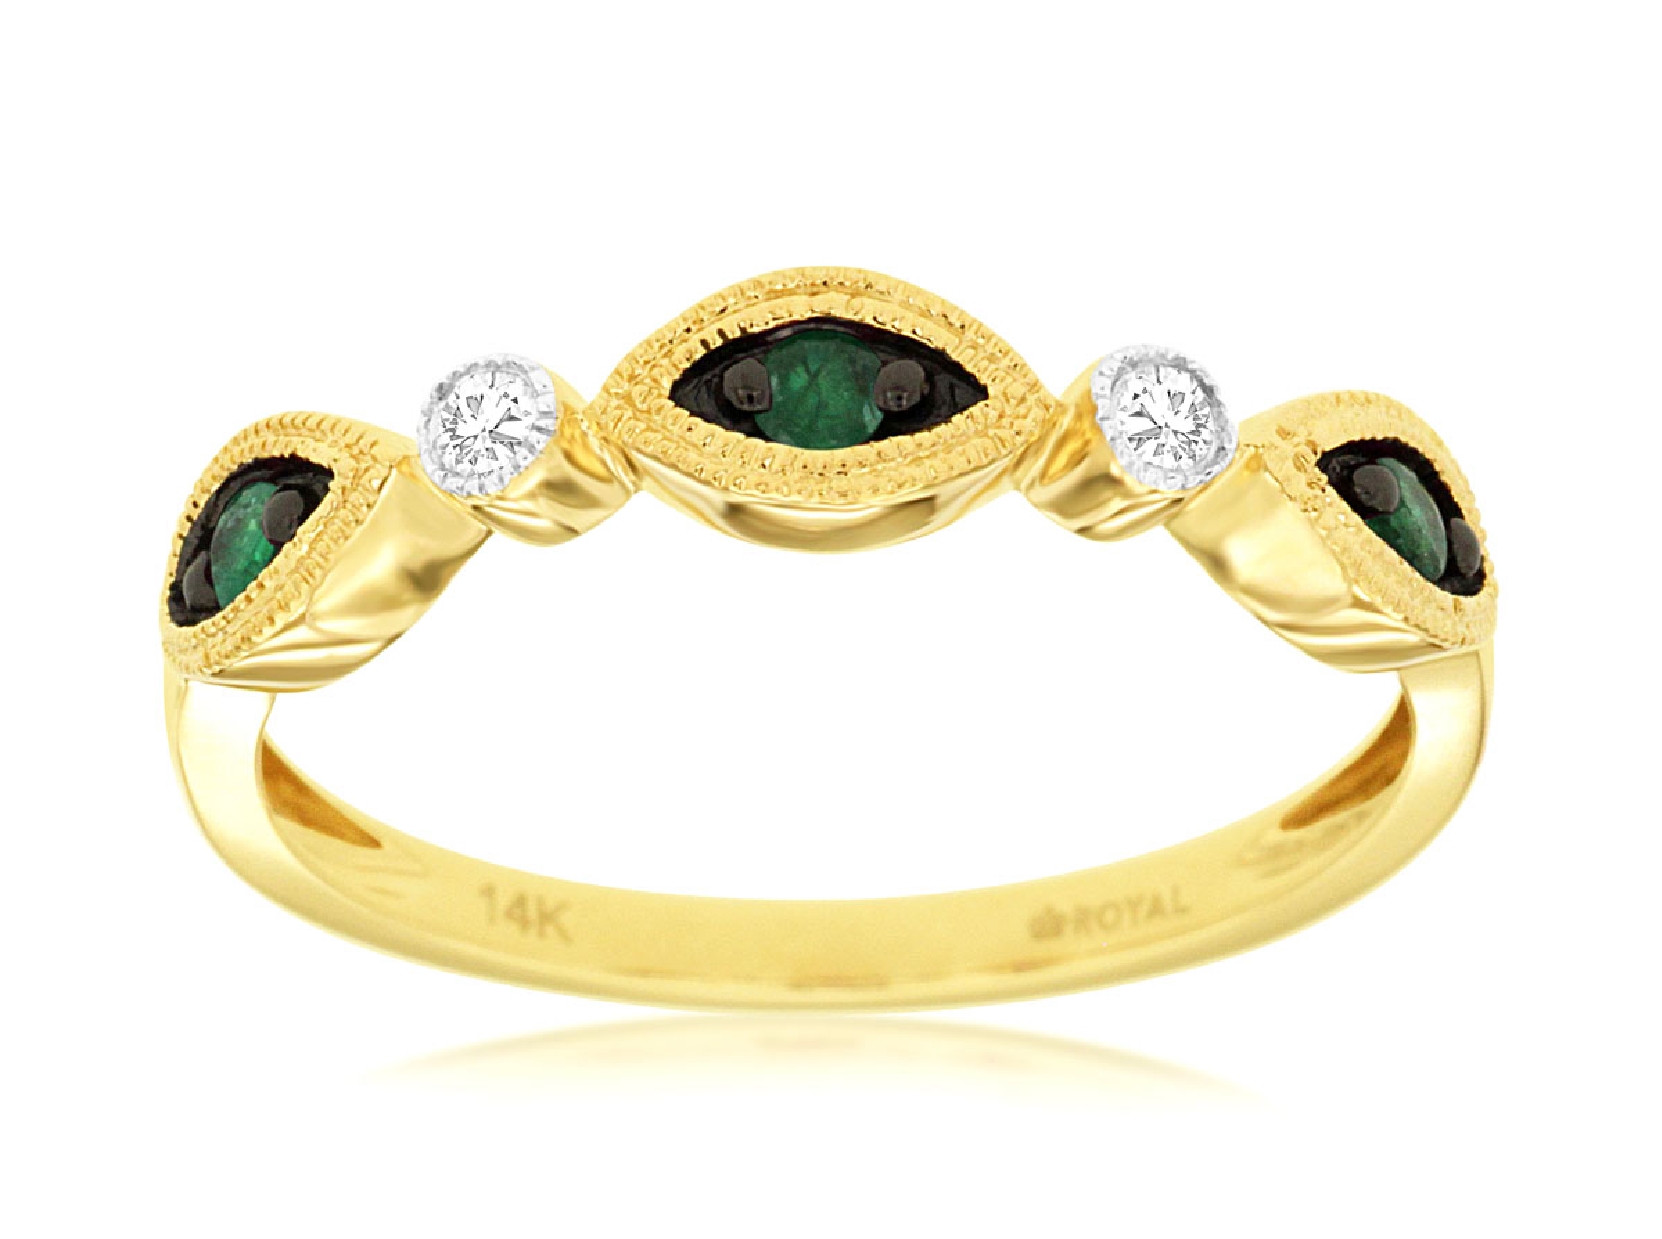 14K Yellow Gold Emerald Ring with Marquis Setting and Accent Diamonds Size 7.25
.04CT Diamonds .14CT Emeralds 
C8650EM